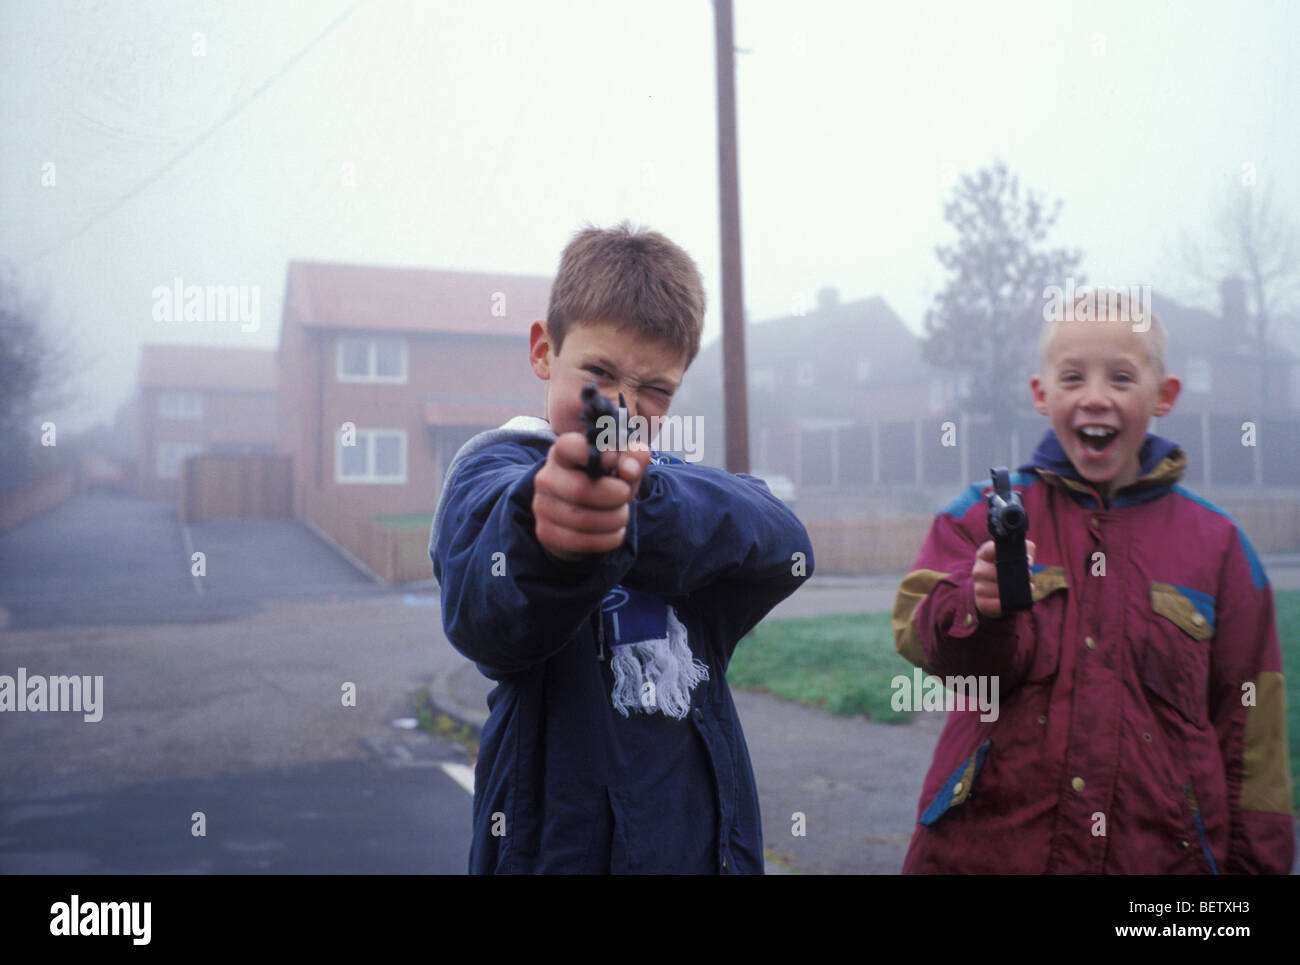 children playing with toy guns in Manton, Nottinghamshire, United Kingdom Stock Photo